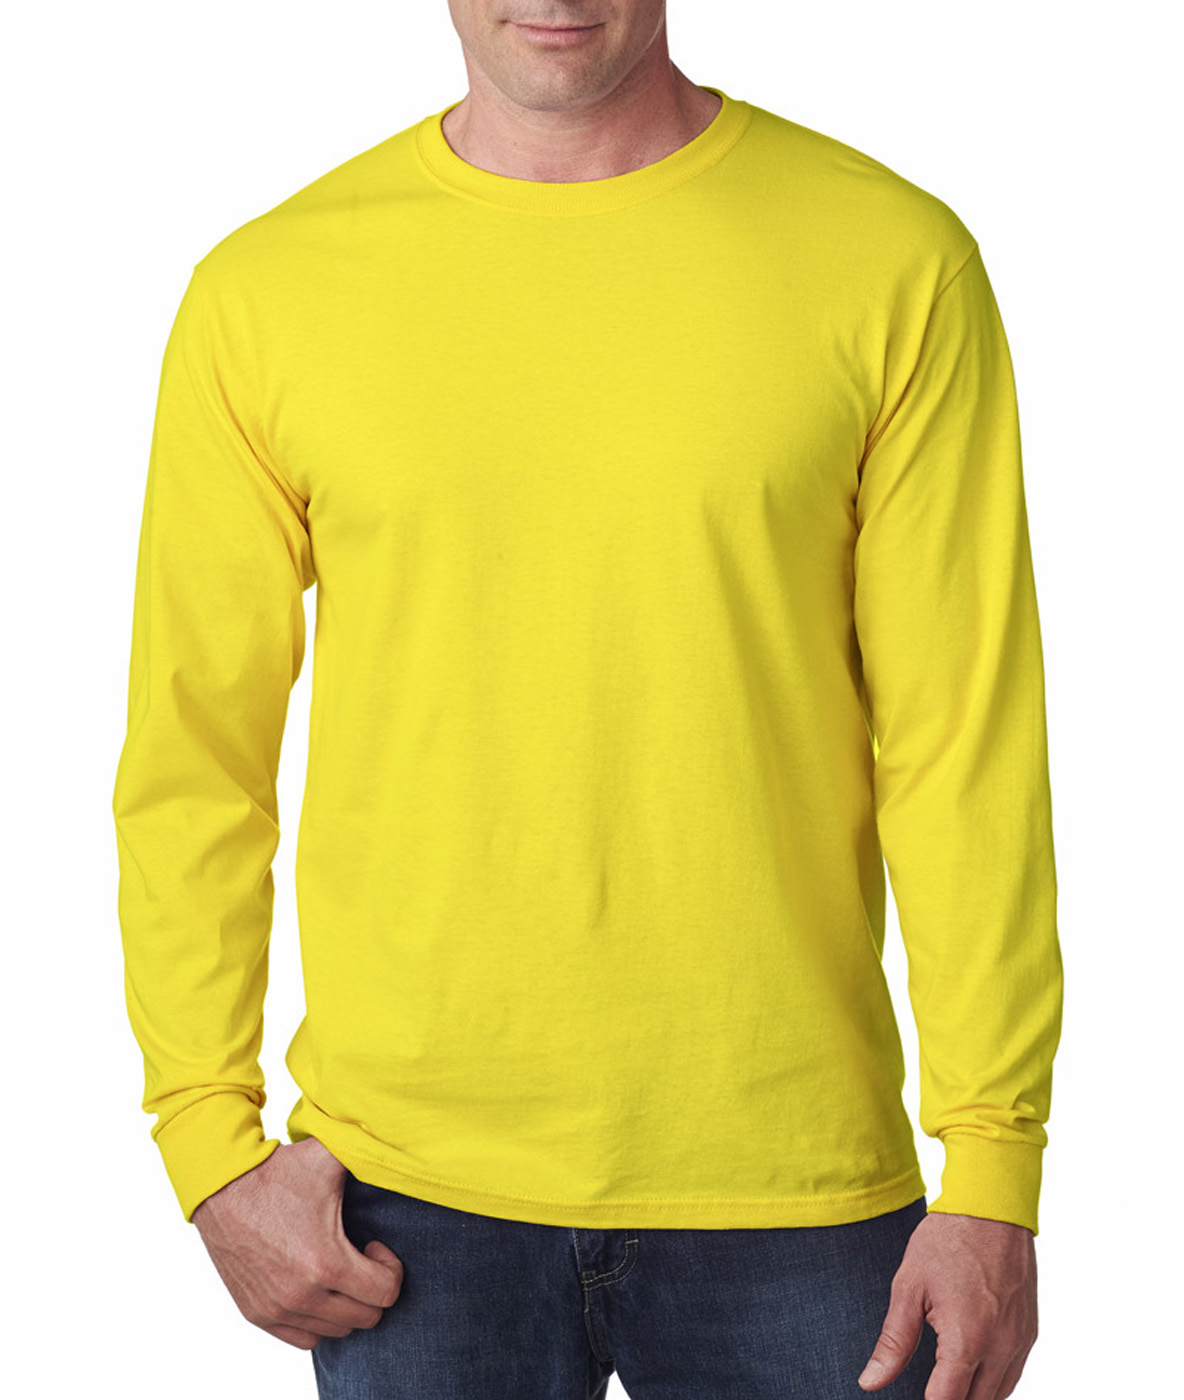 Fruit of the Loom Boys 6-20 HD Cotton Long Sleeve T-Shirt - image 2 of 2